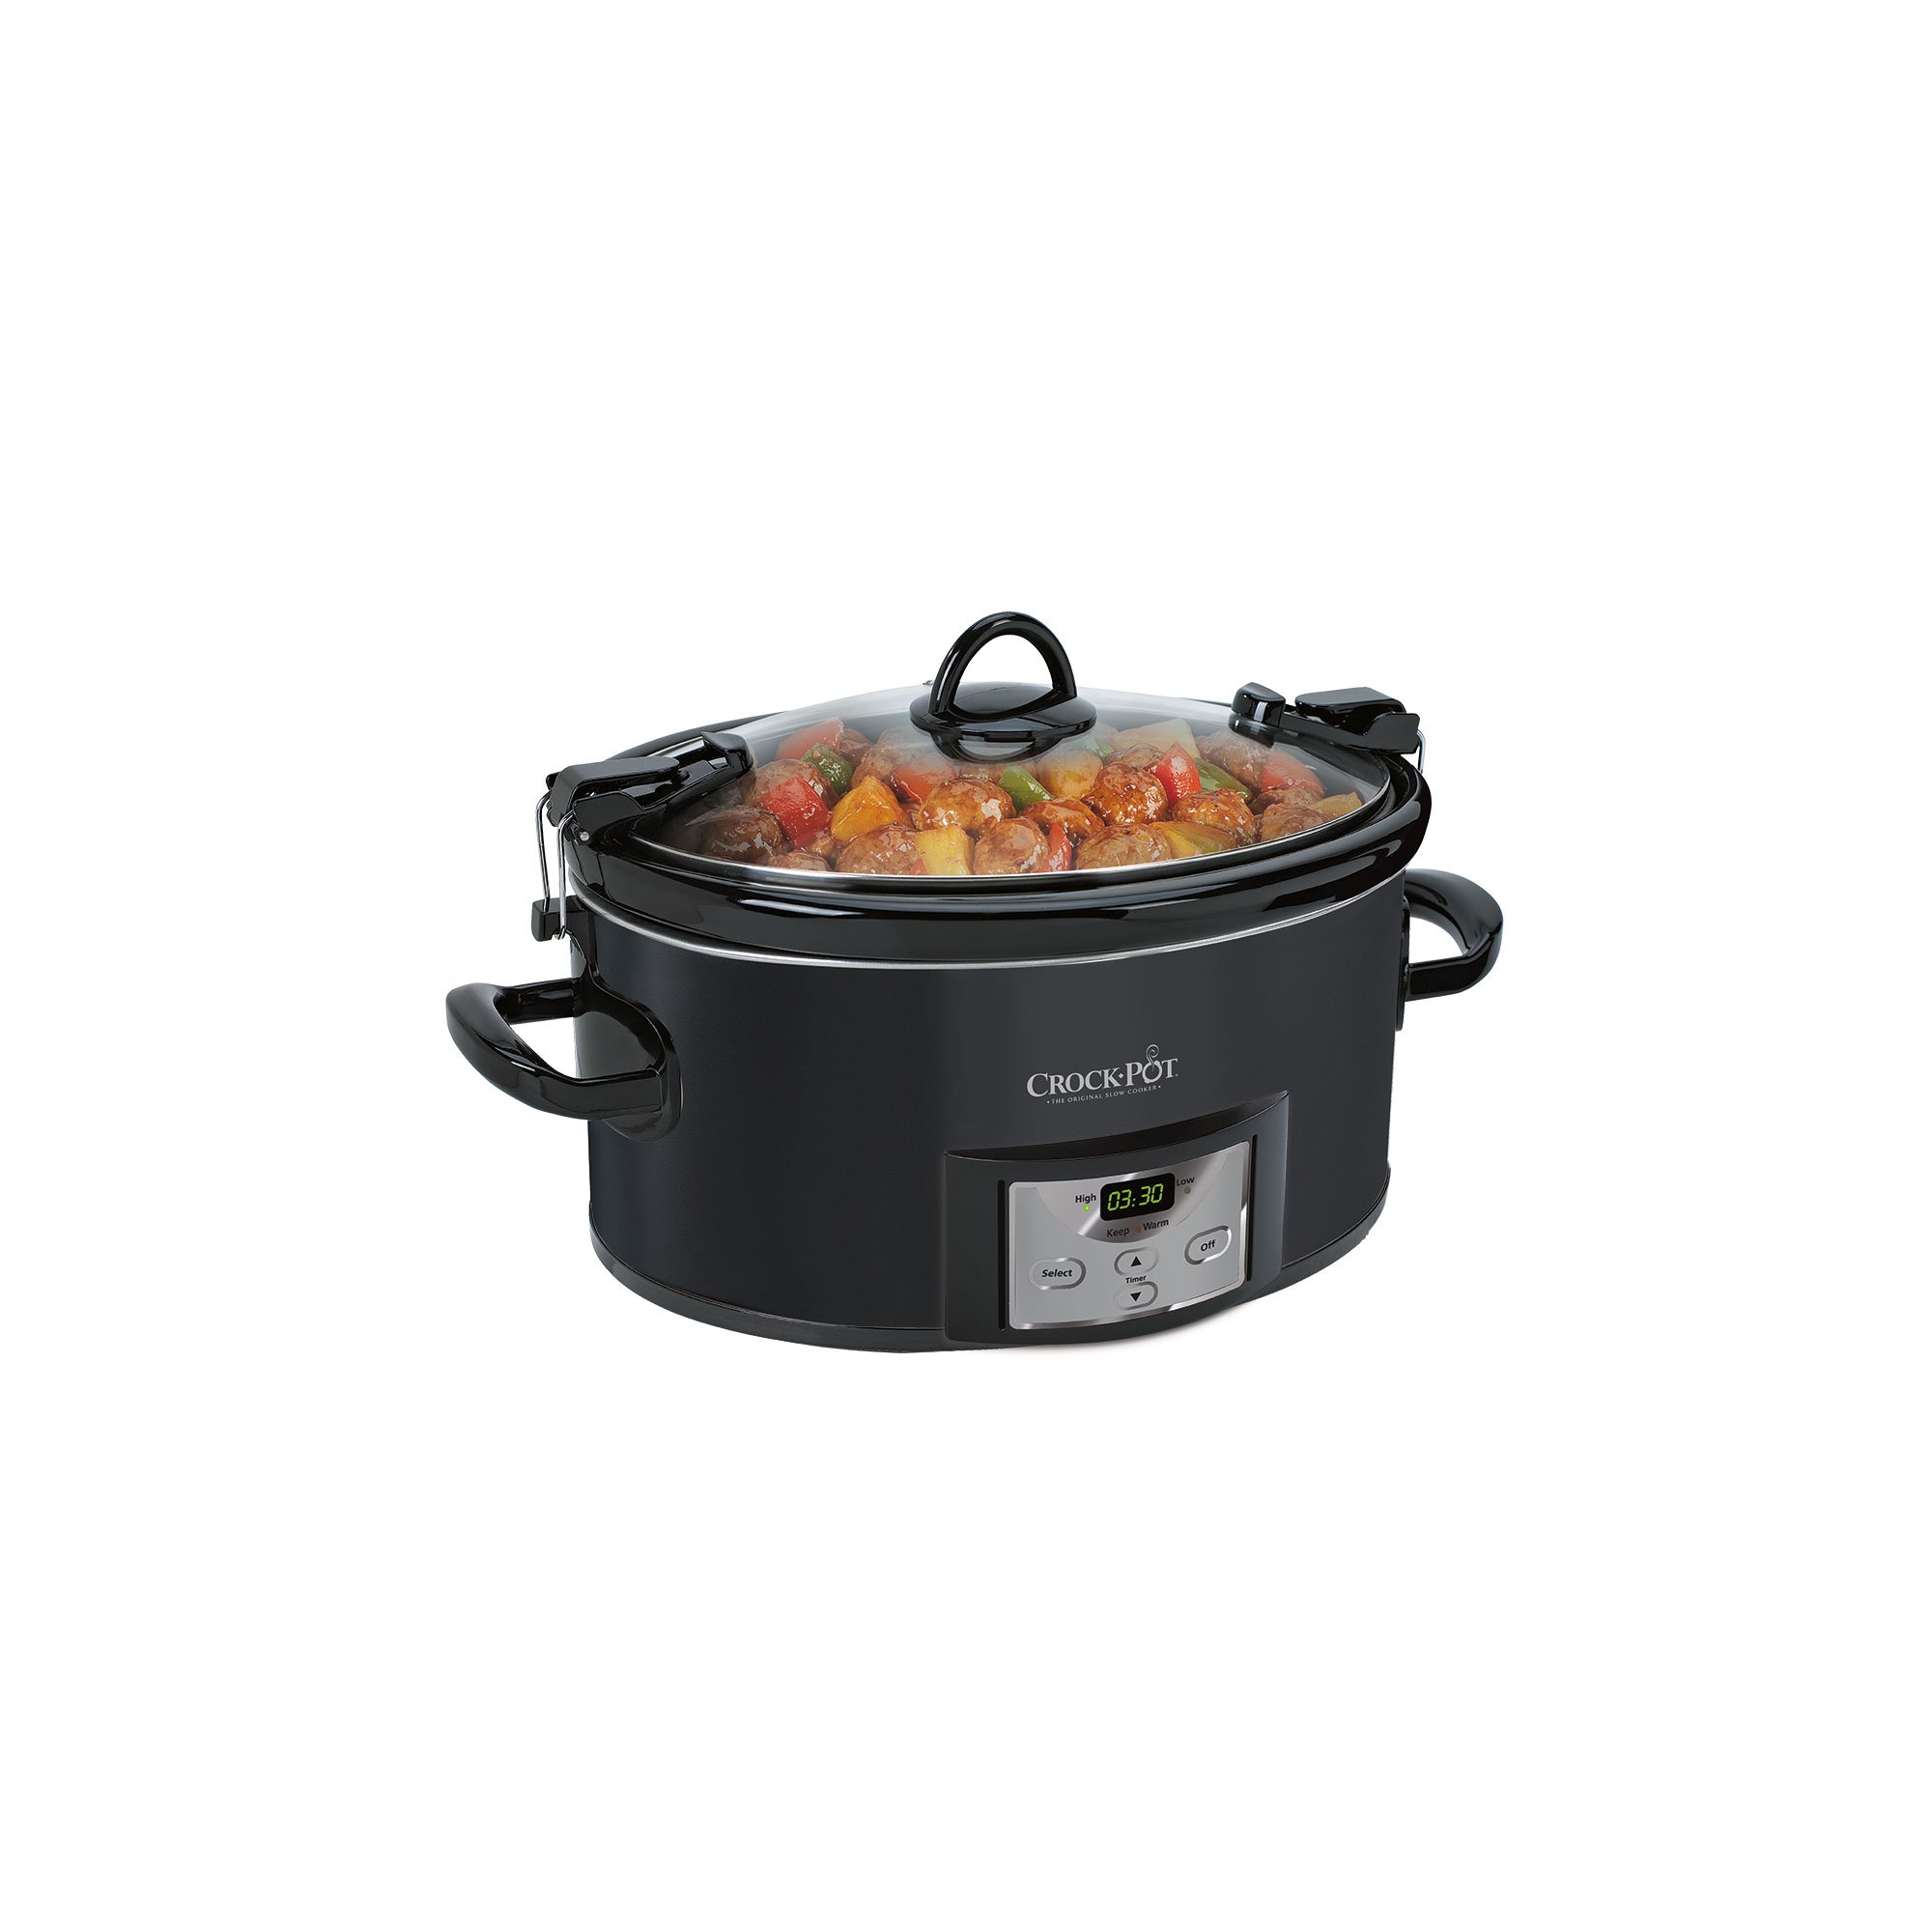 Crock-Pot® Programmable 4-Quart Cook & Carry Slow Cooker, Stainless Steel